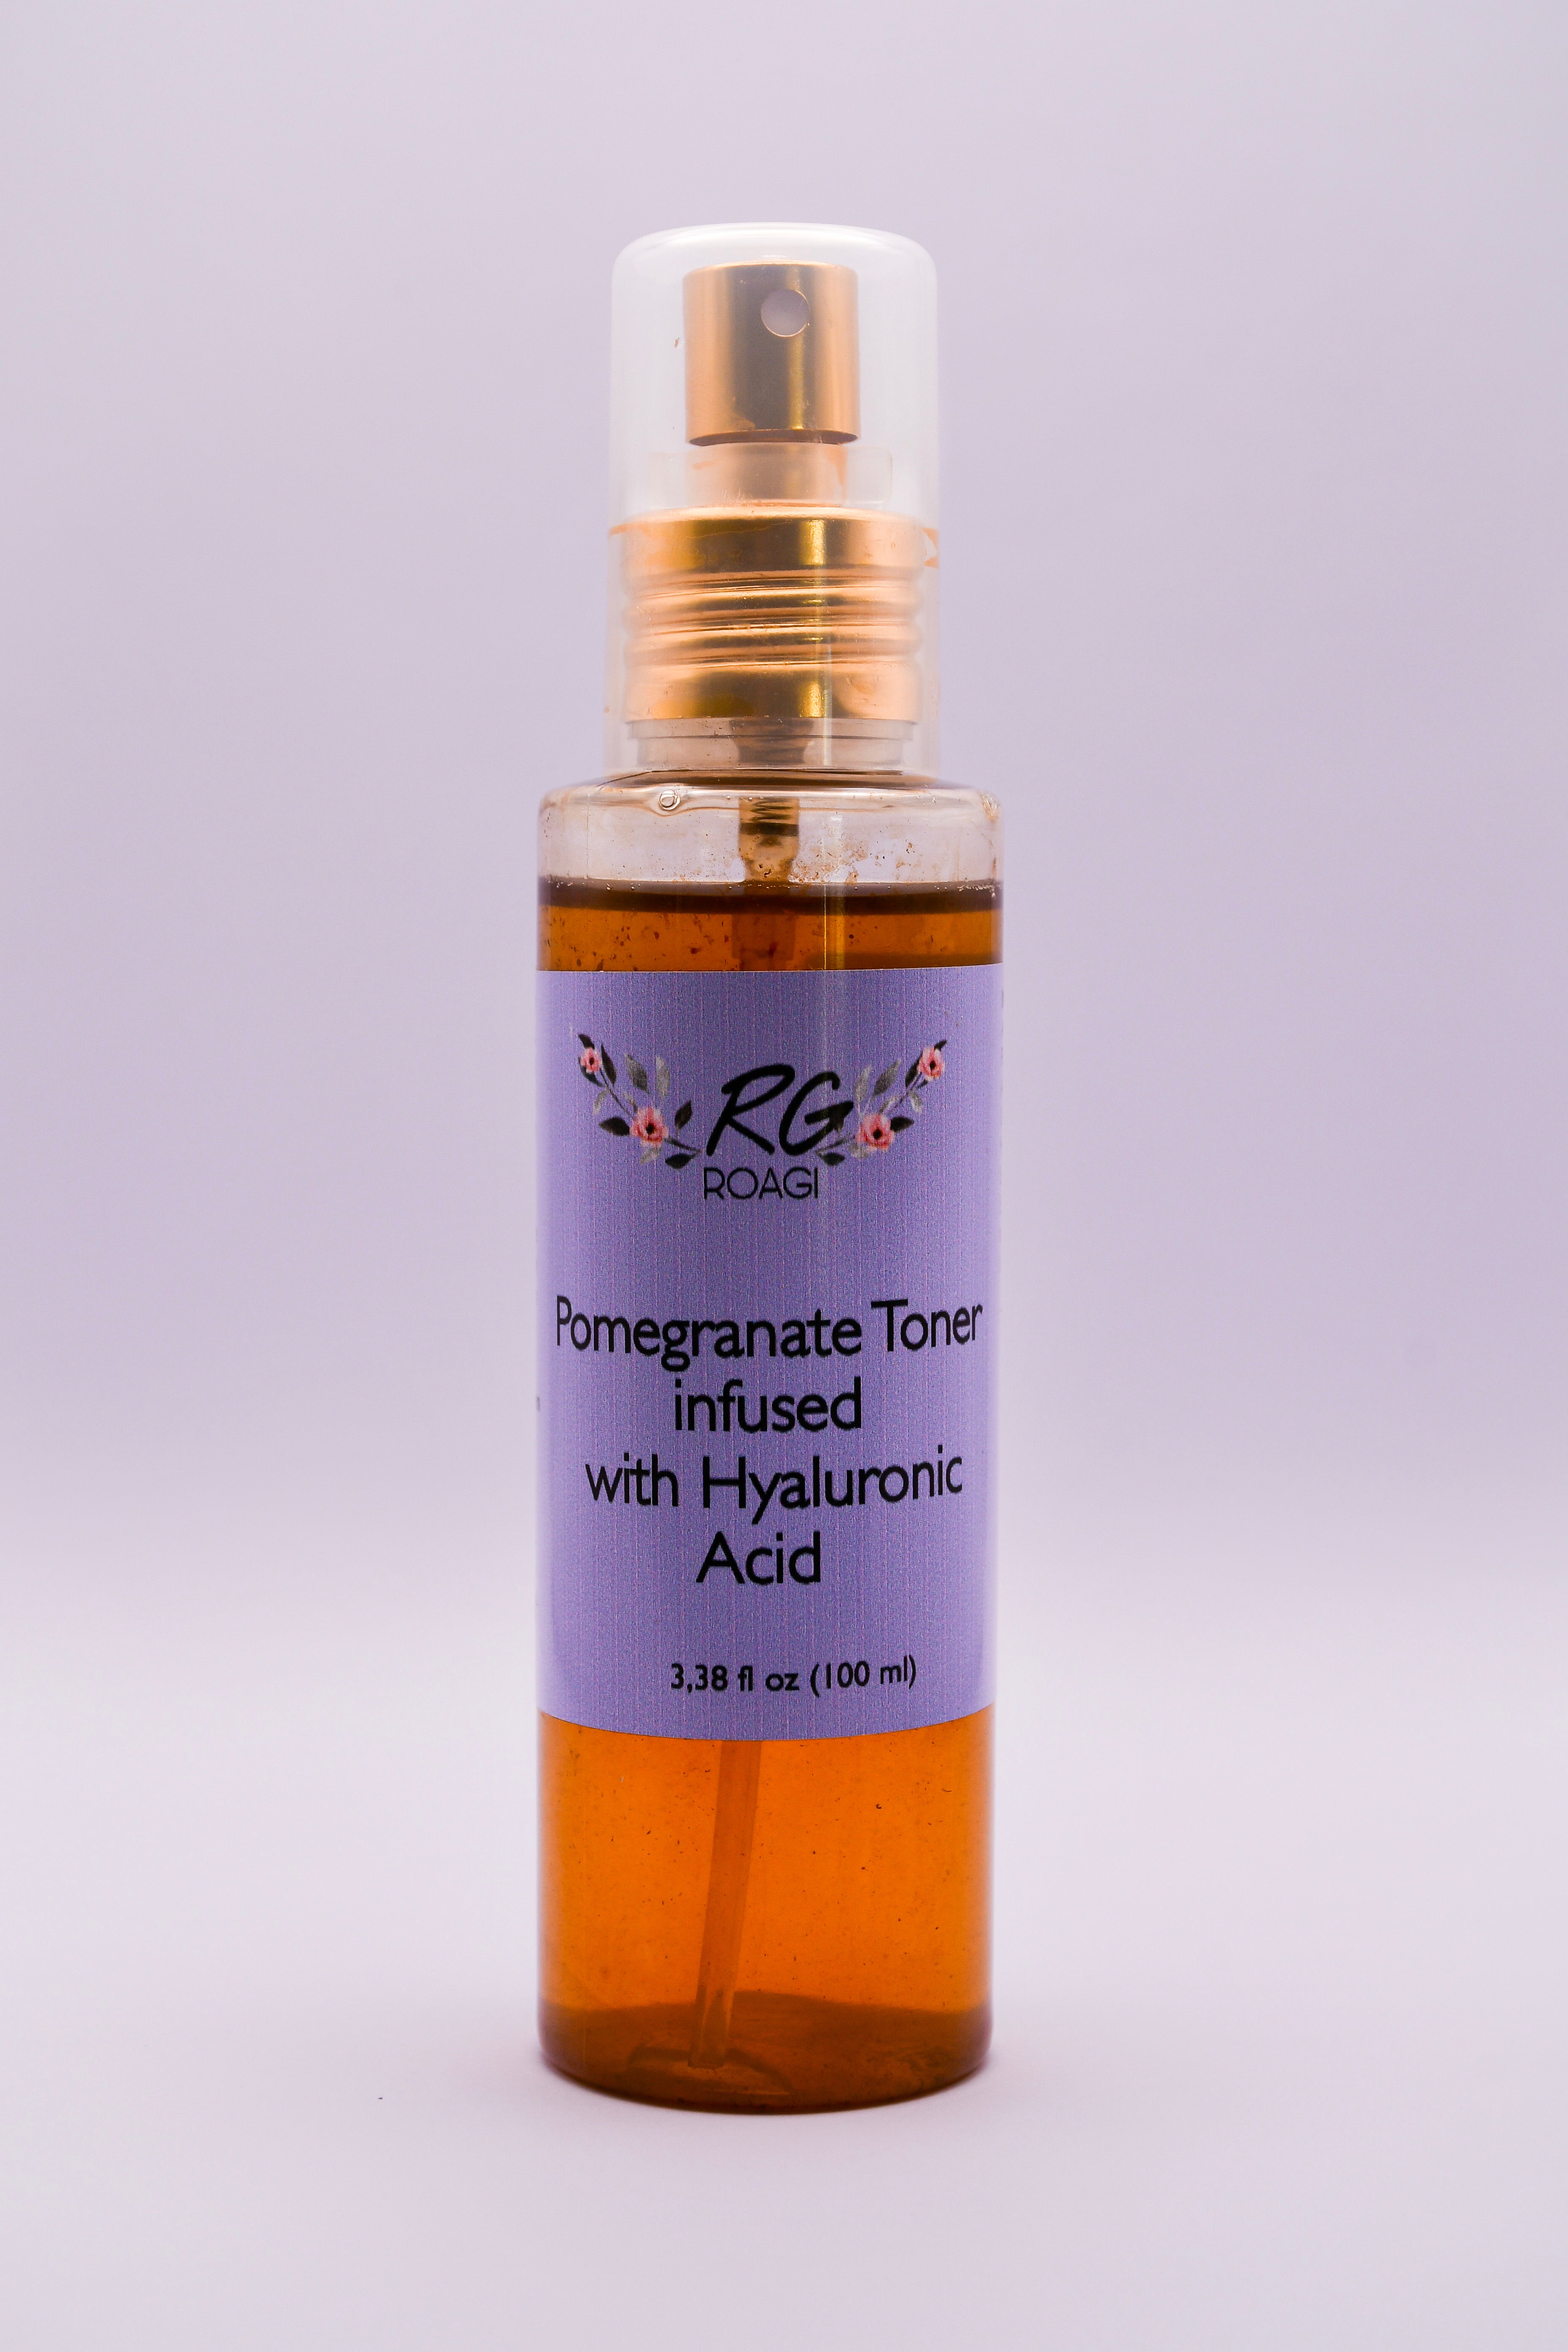 Pomegranate Toner infused with Hyaluronic Acid